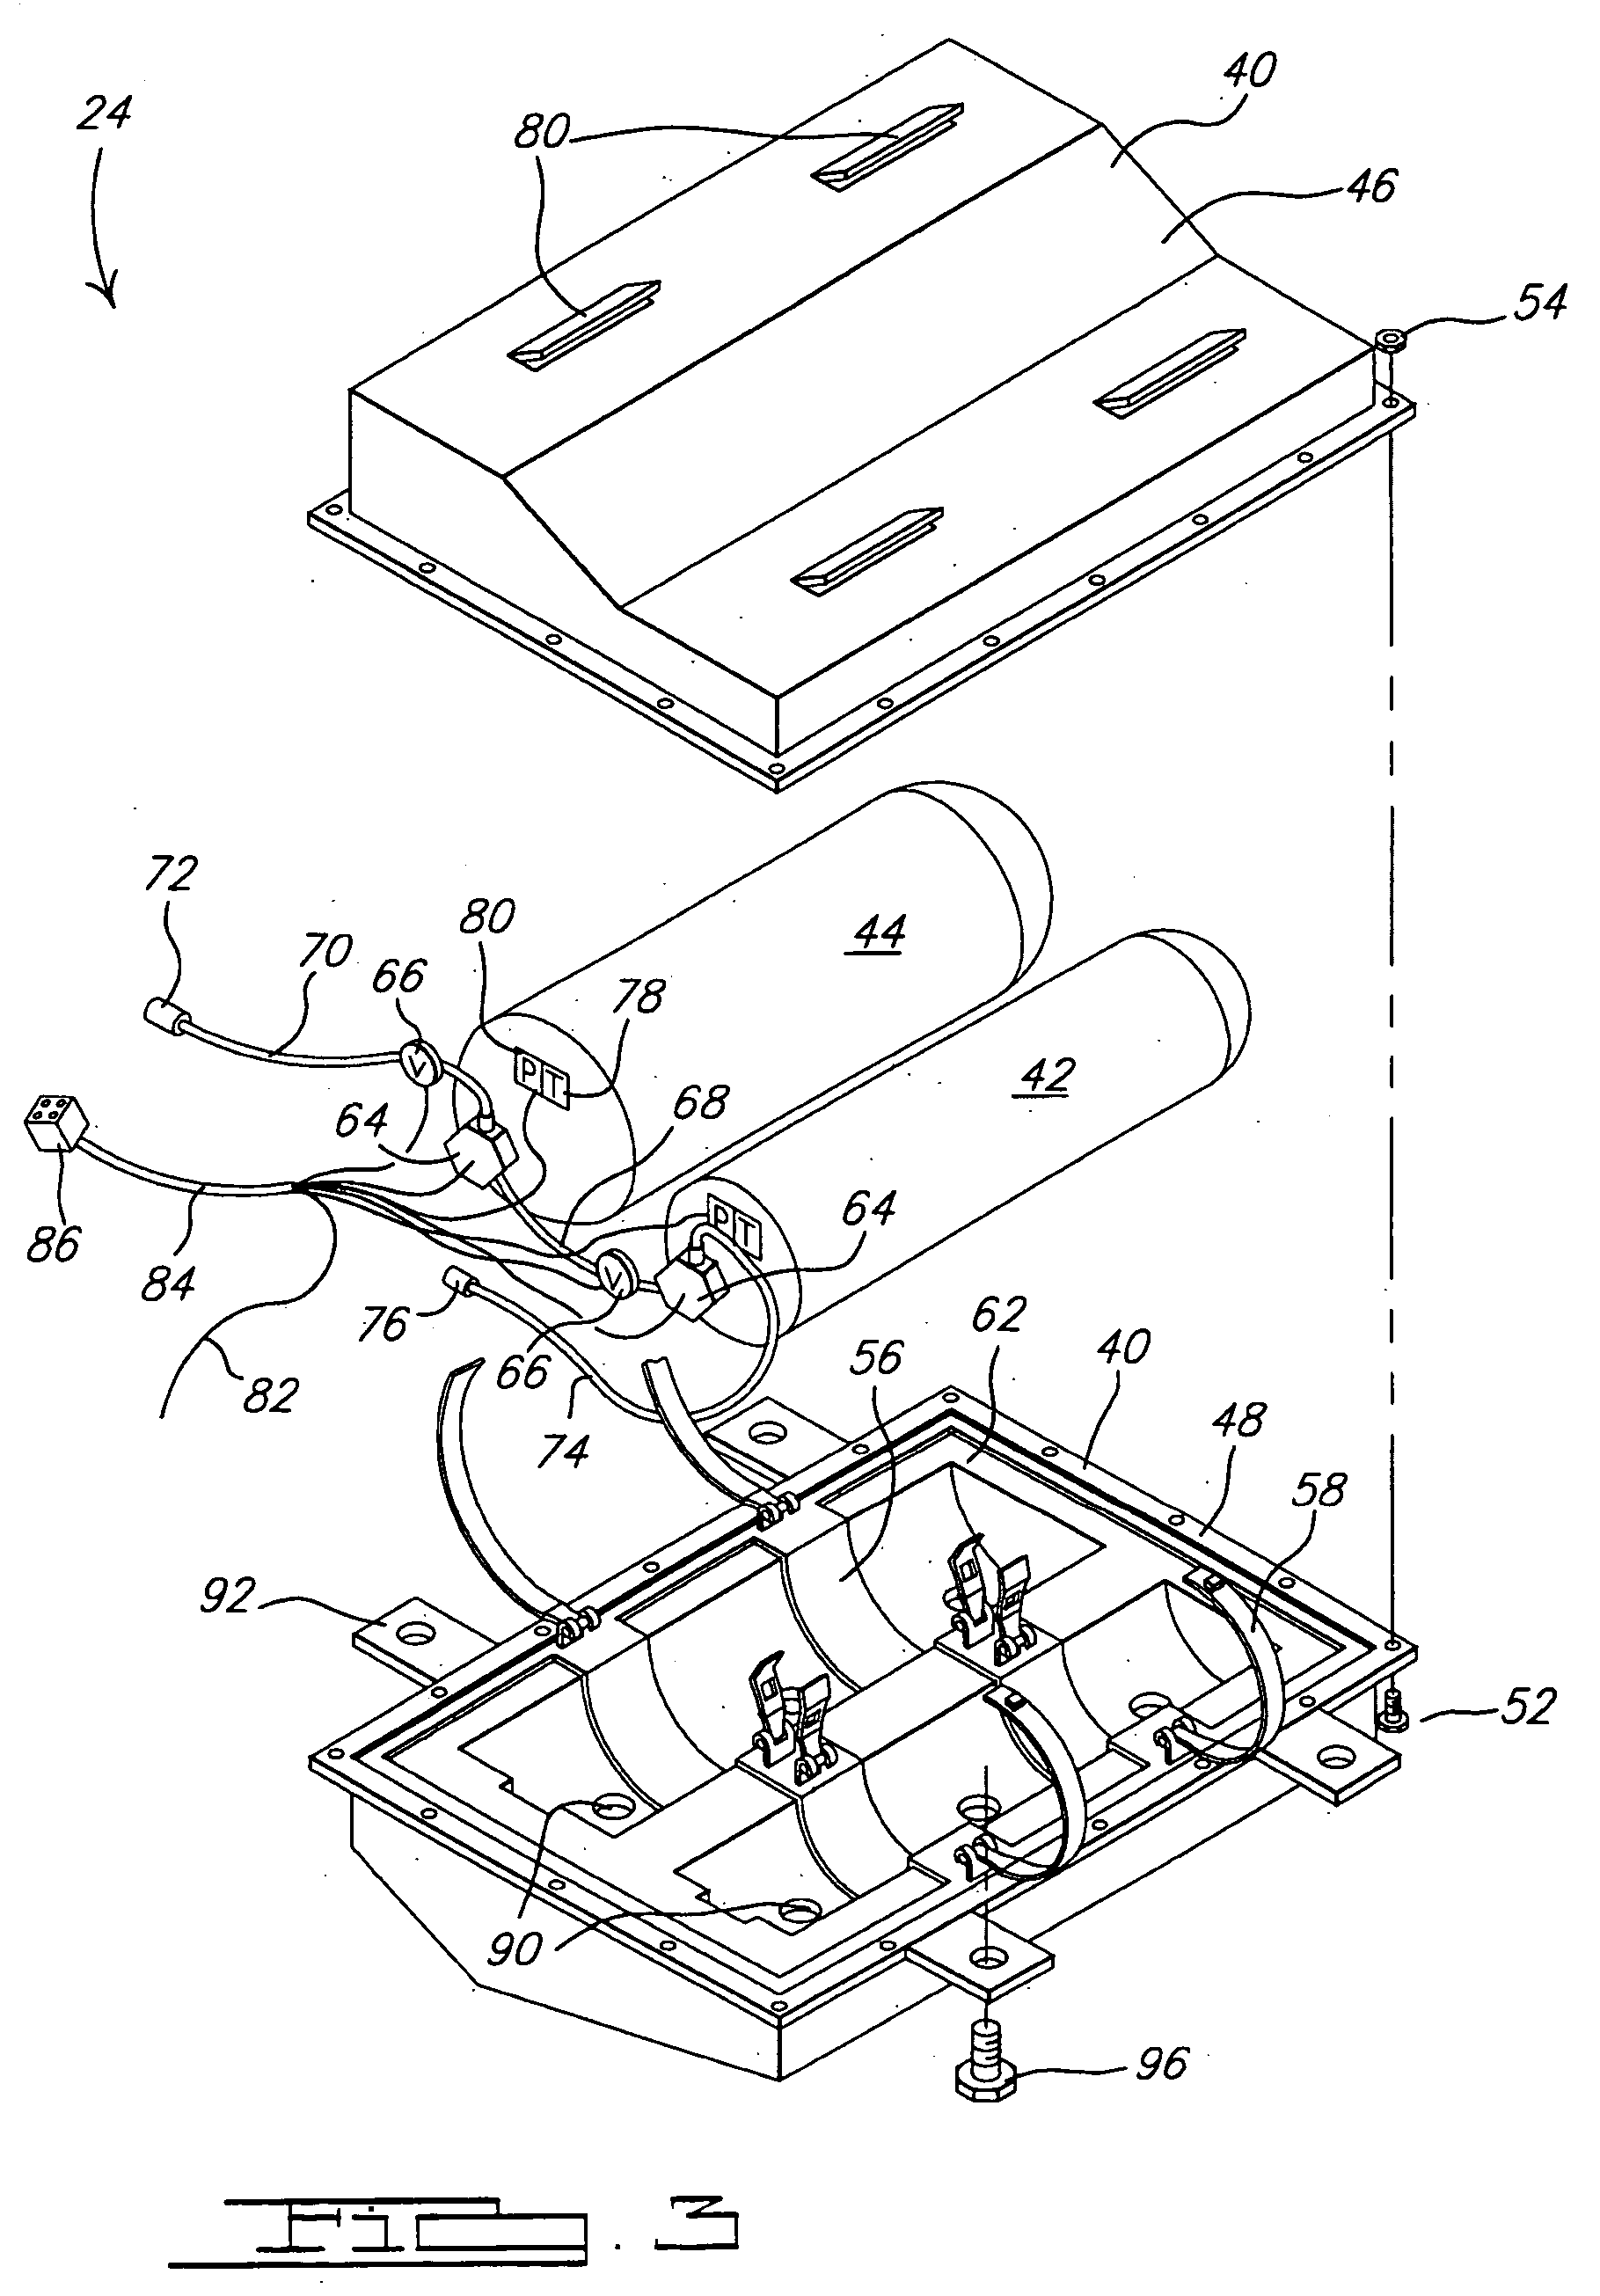 Container for gas storage tanks in a vehicle